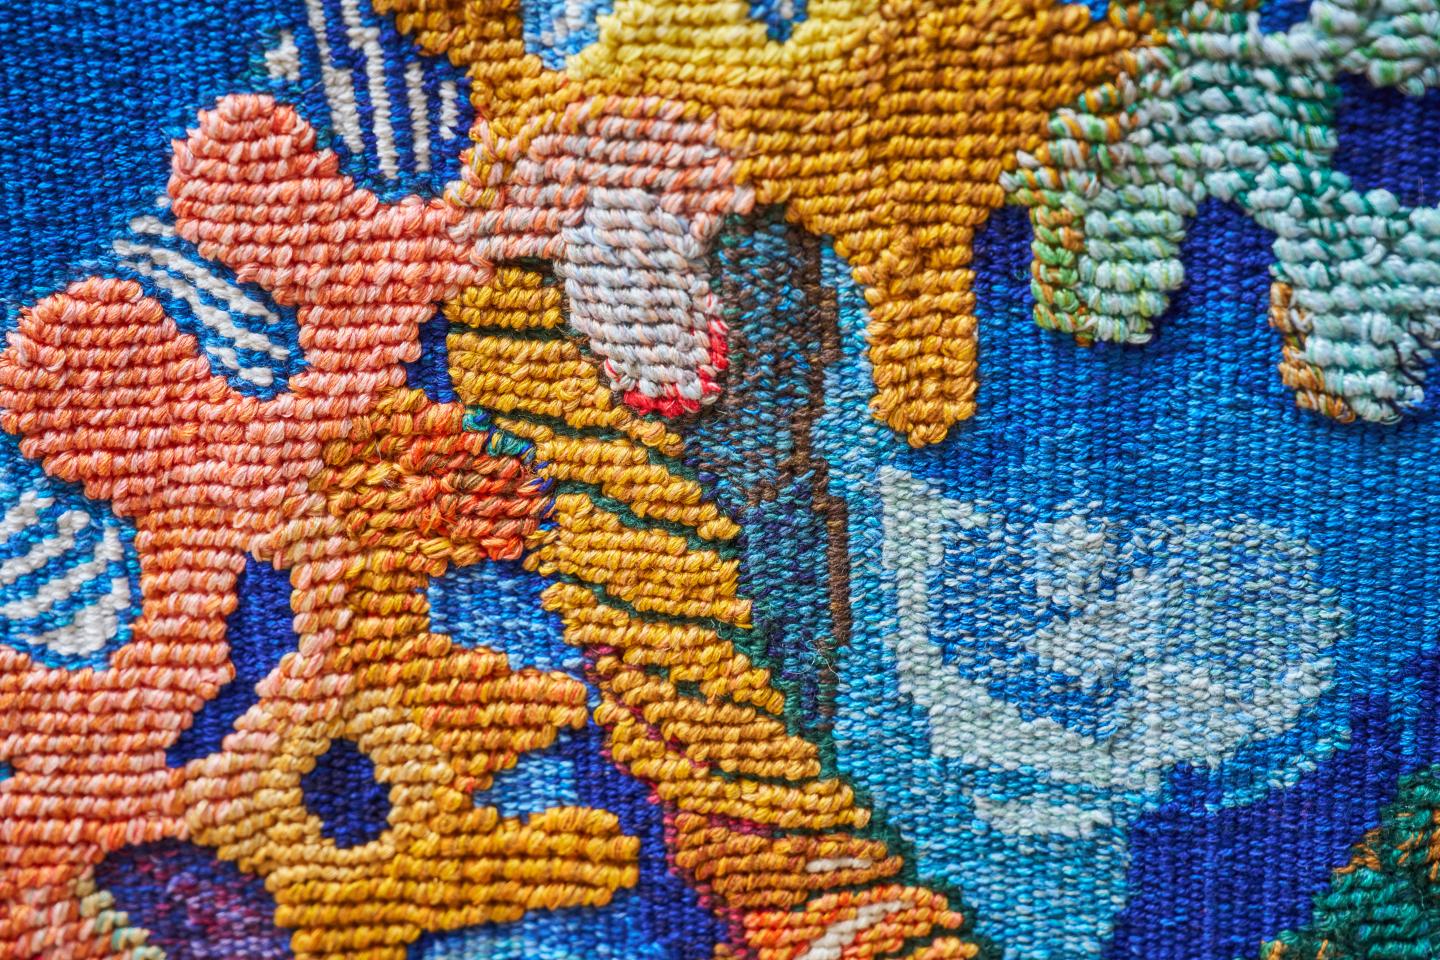 Close up image of the weaving of a tapestry, showcasing orange corals and a twisted yellow rope on a blue background